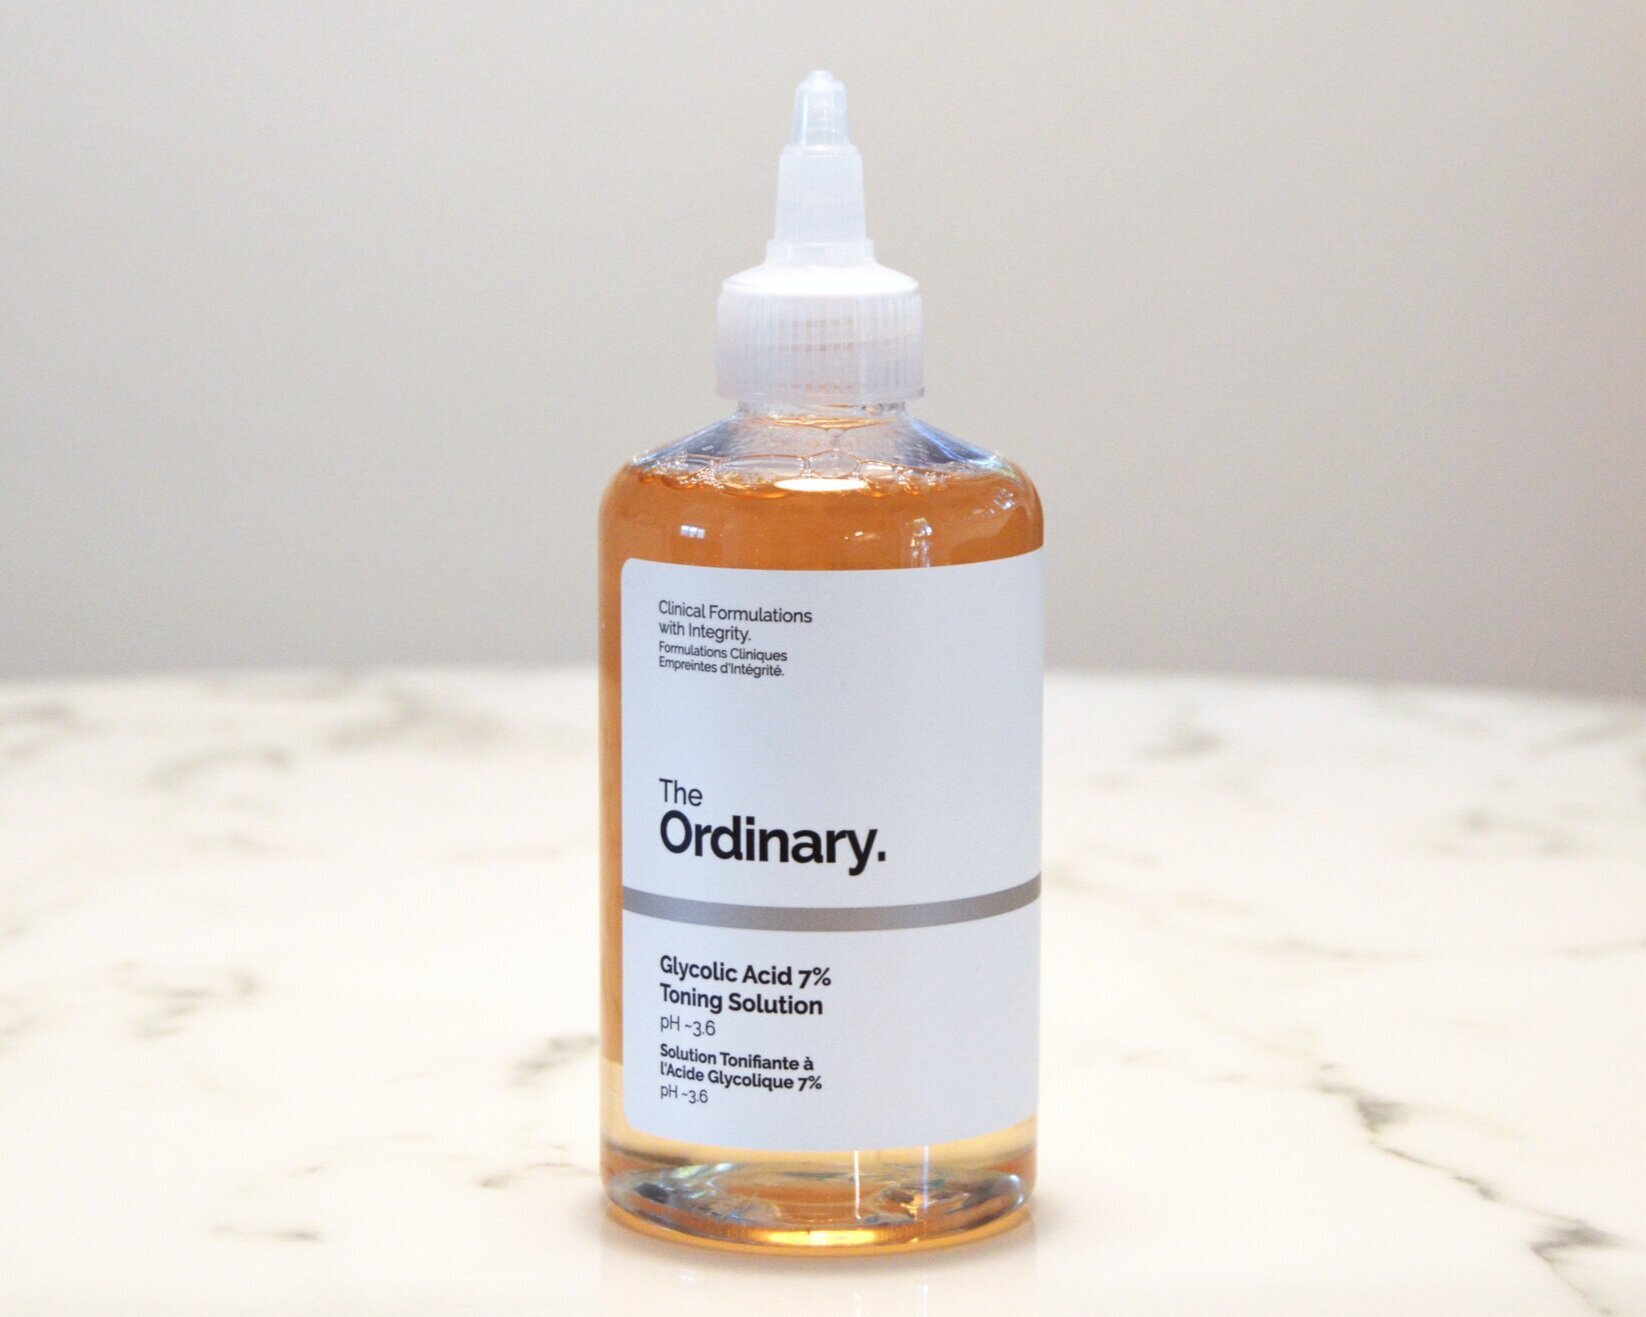 The ordinary toning solution